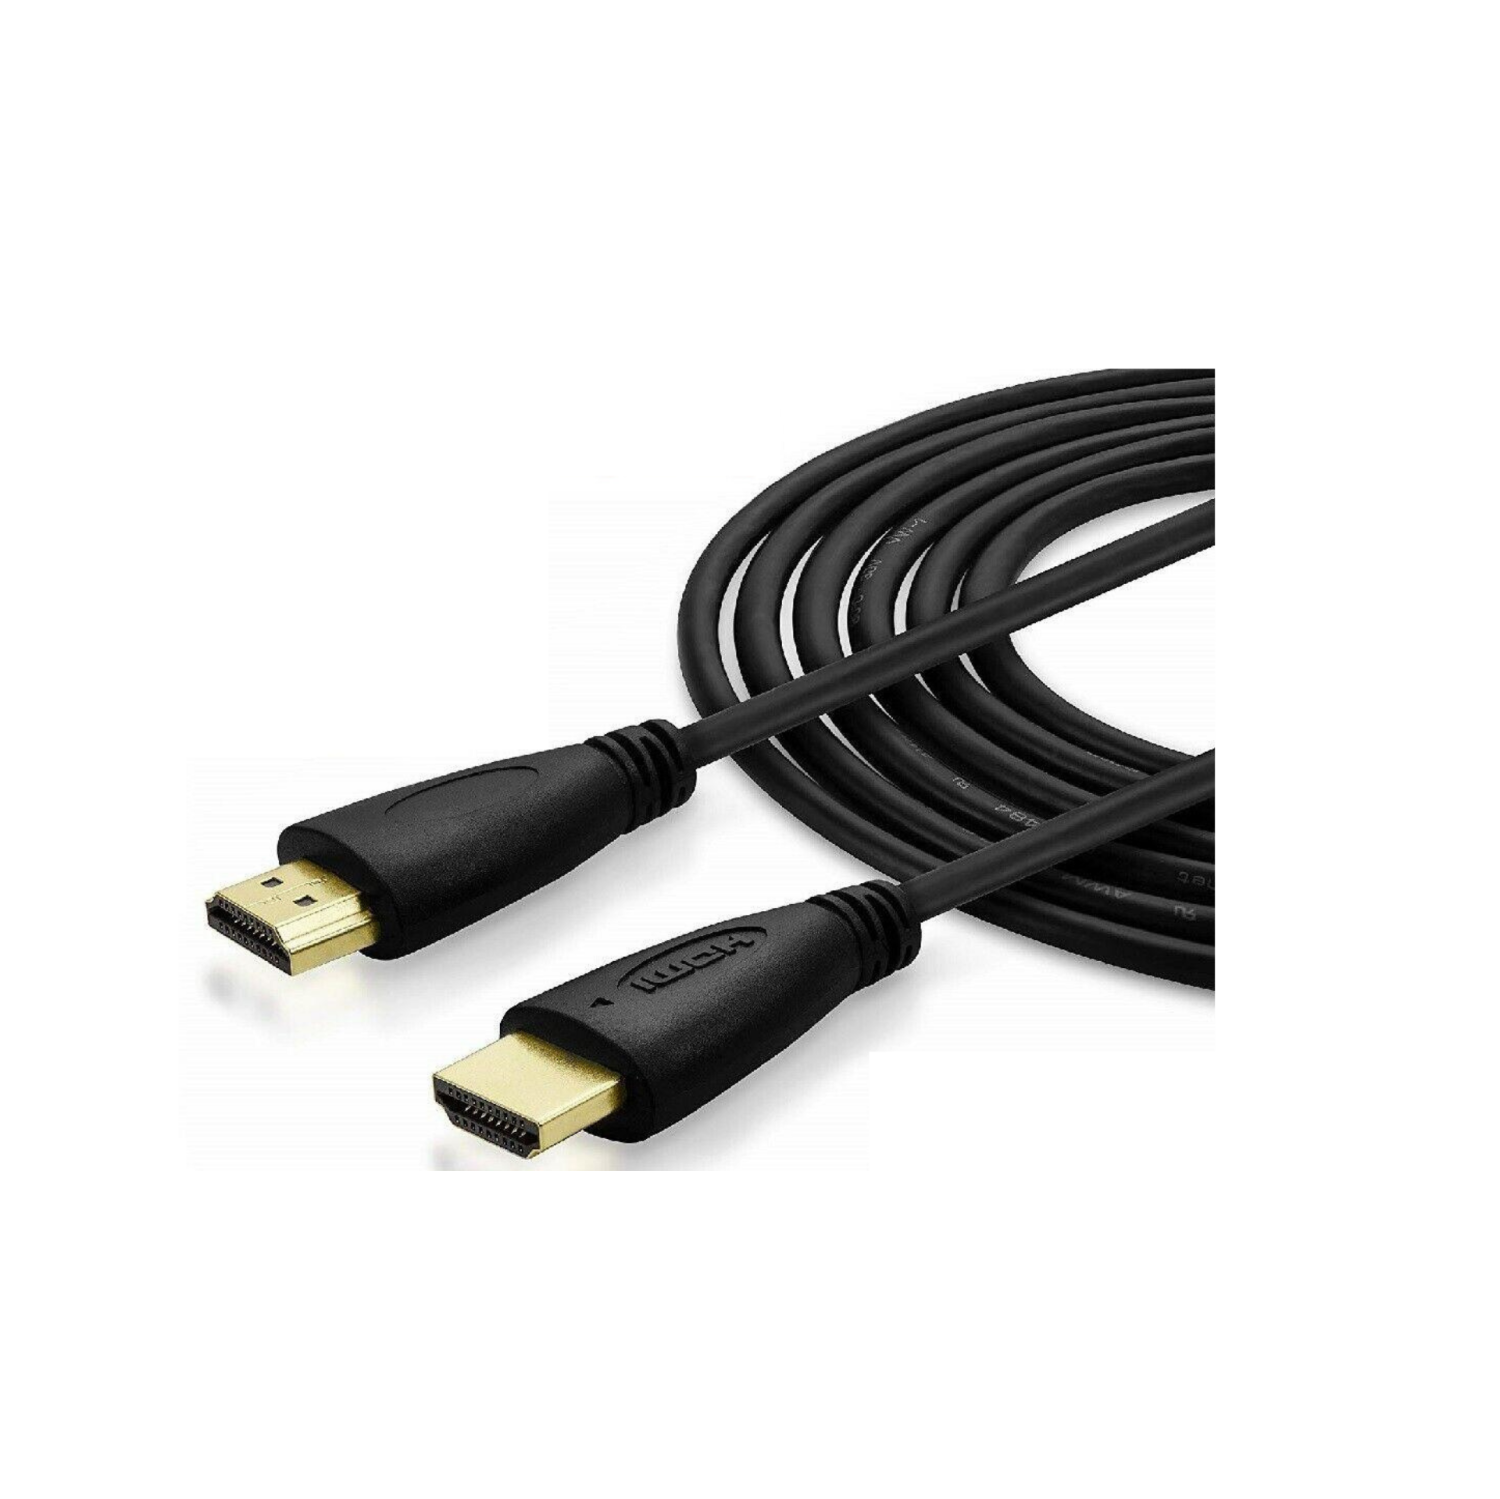 HDMI Cable Full HD 1080p For TV PS4 PS3 Xbox One Blu-Ray Monitor PC Computer